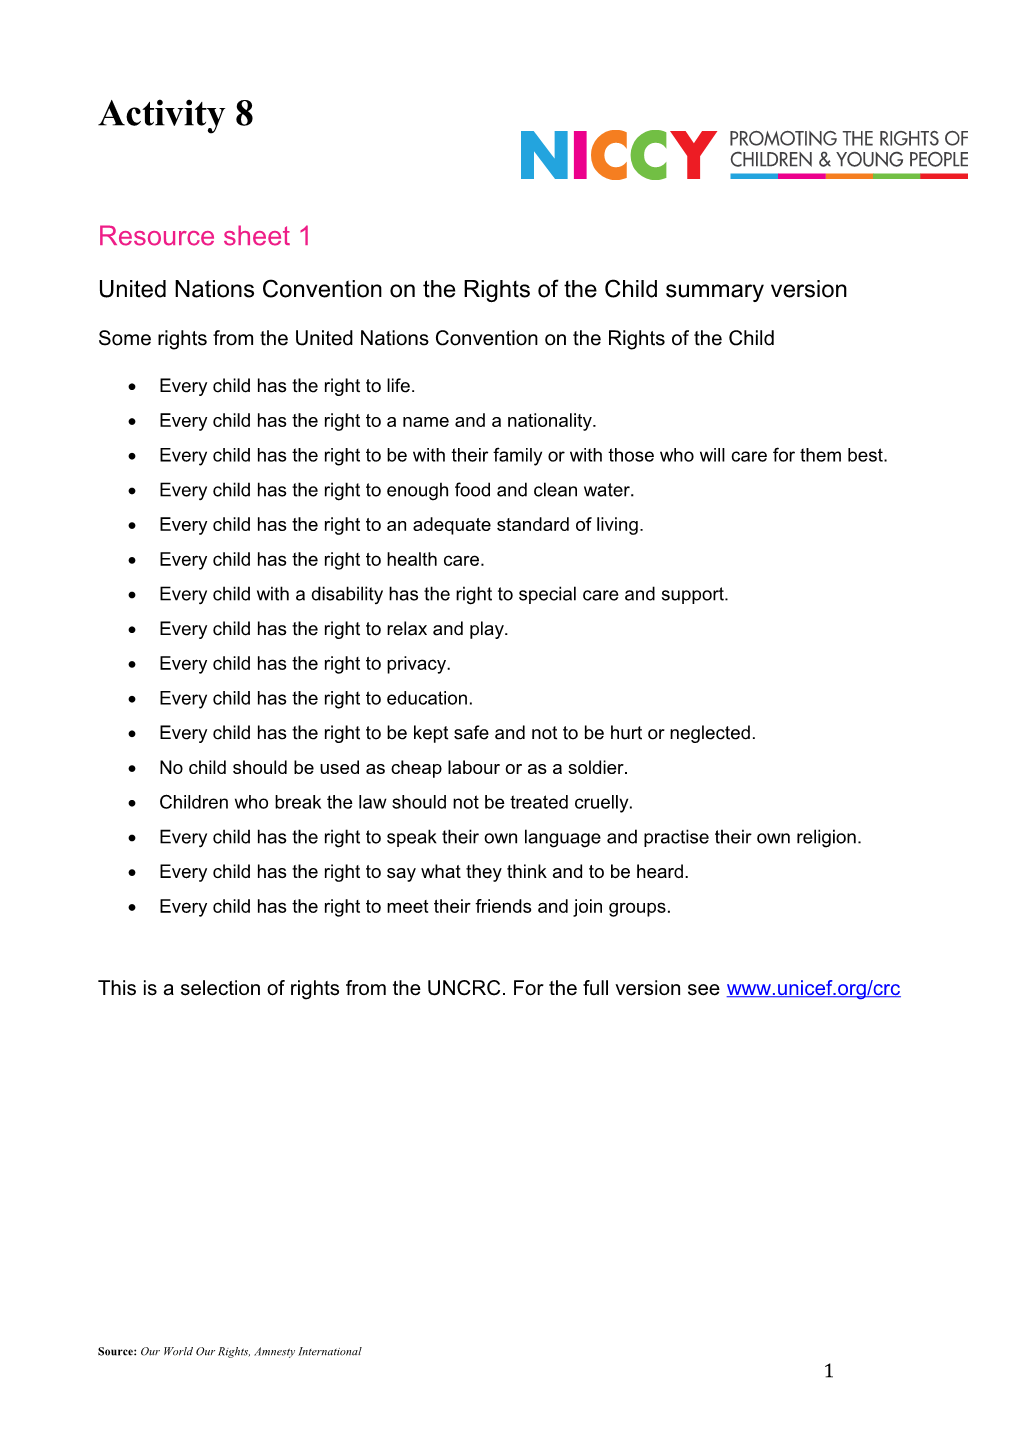 United Nations Convention on the Rights of the Child Summary Version